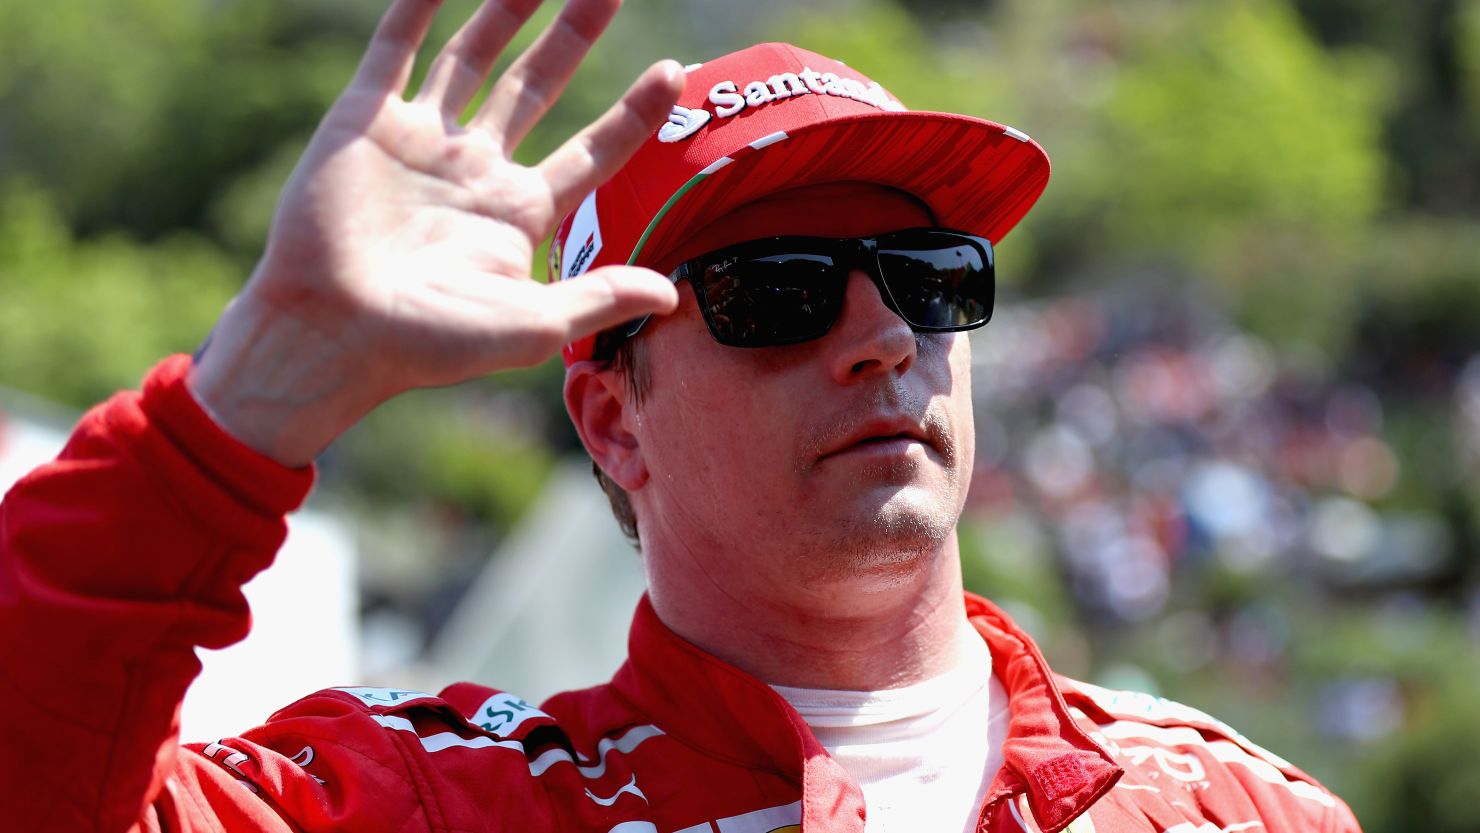 Kimi Raikkonen of Finland claimed his first pole position since 2008 to lead a Ferrari one-two in qualifying for the Monaco GP. 